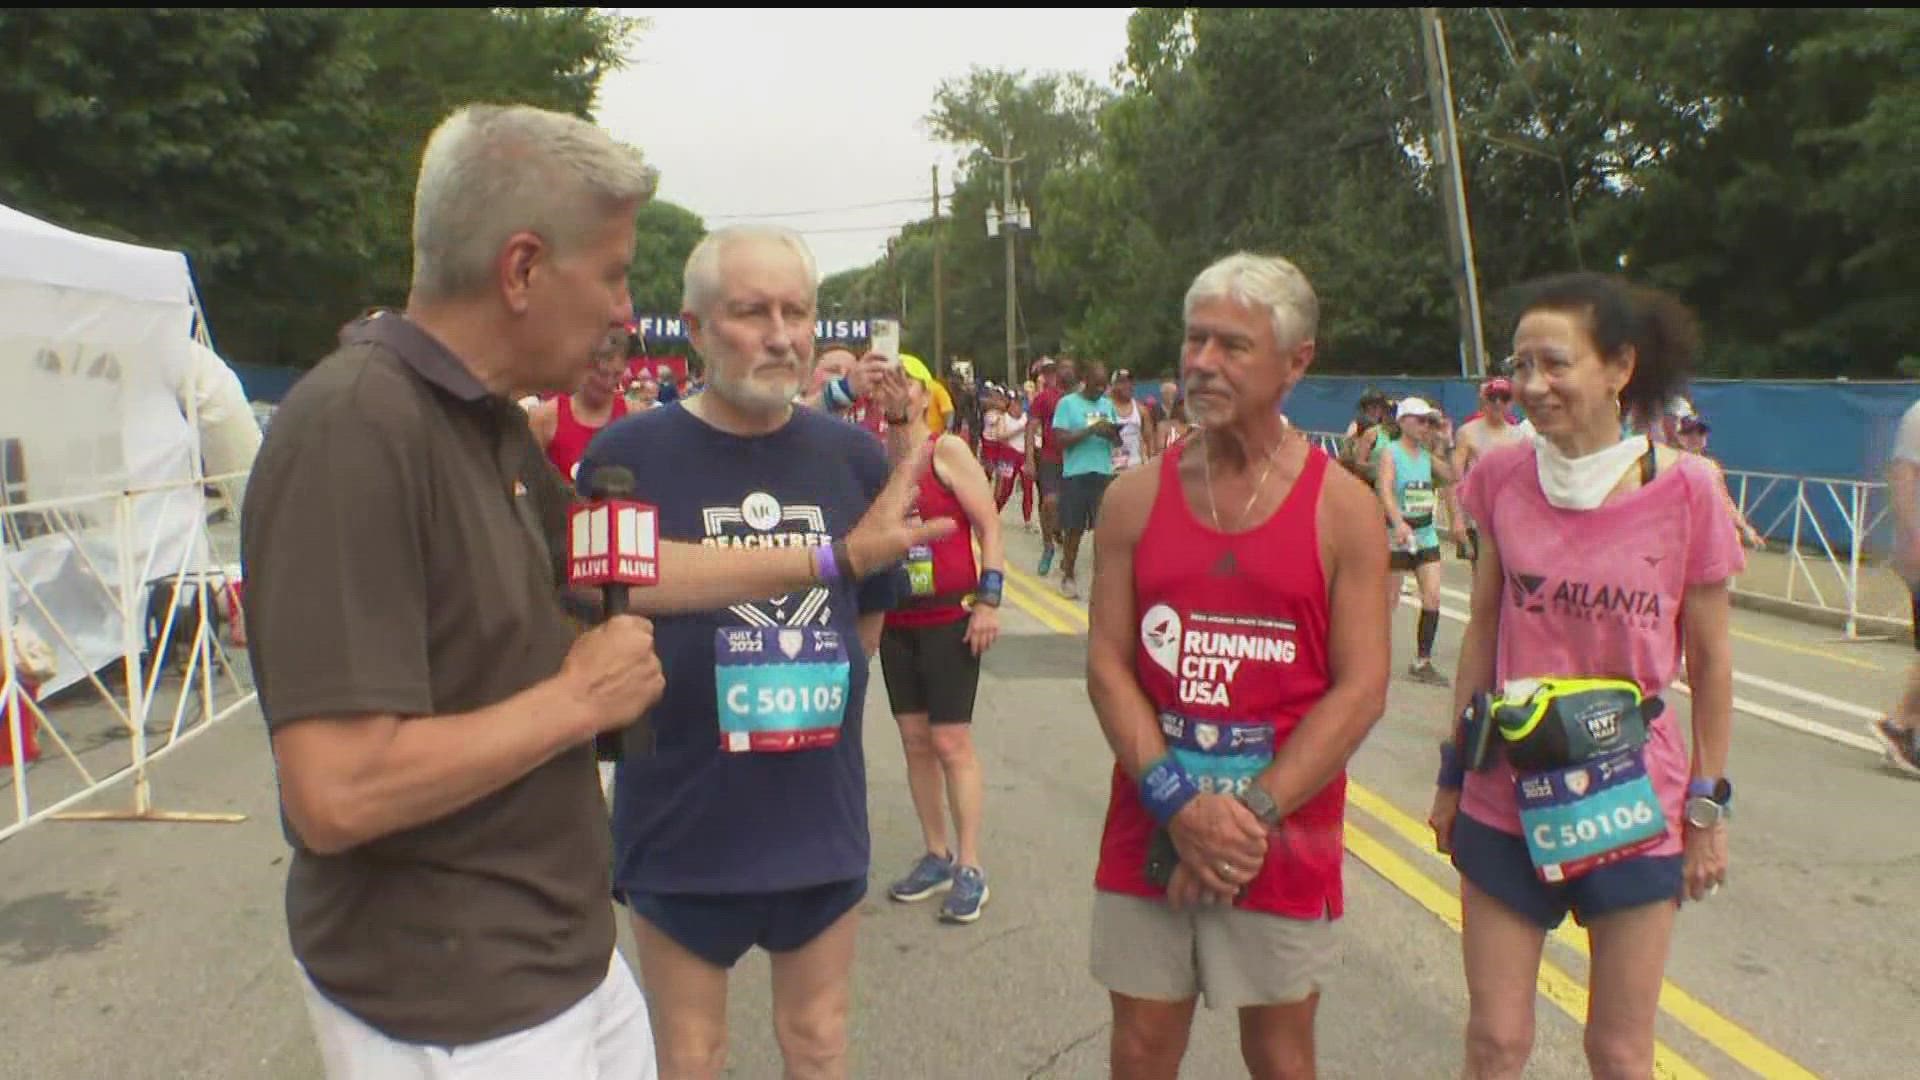 A longtime runner and friend to the AJC Peachtree Road Race, Jack Abbott found himself in need of a miracle. His pastor stepped up to help.